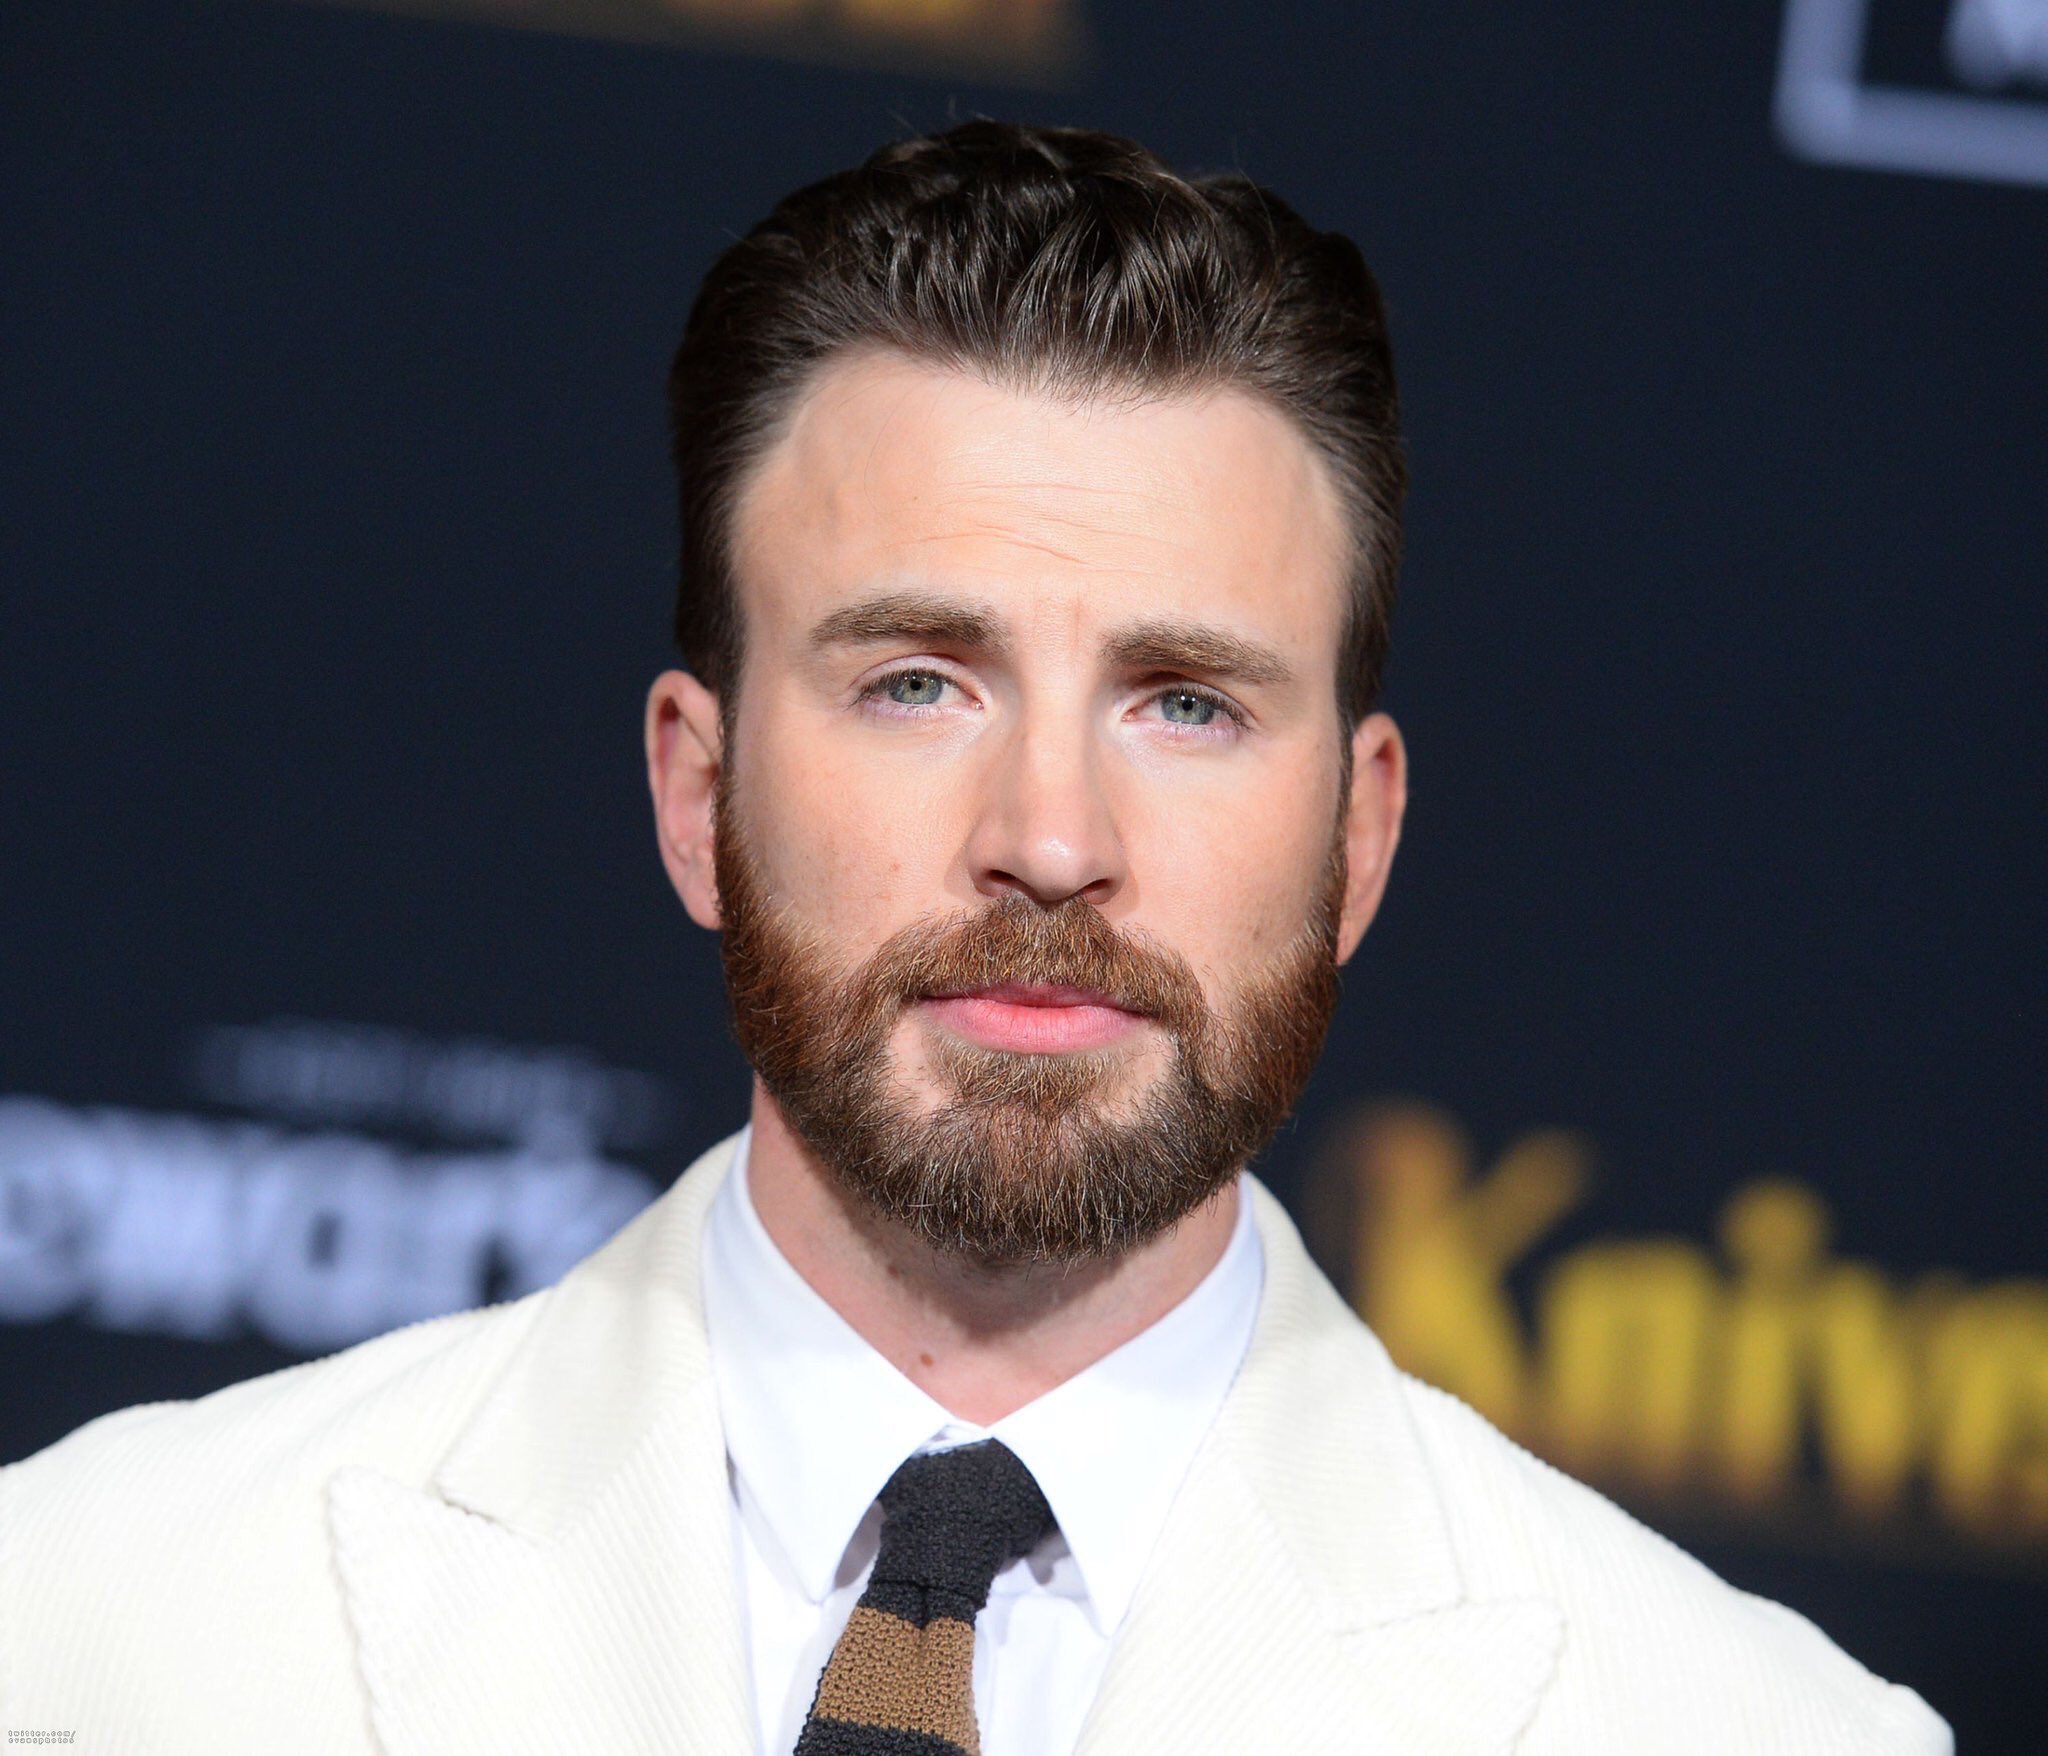 Blue Suit worn by Chris Evans on the Instagram account @aboutchrisevans |  Spotern